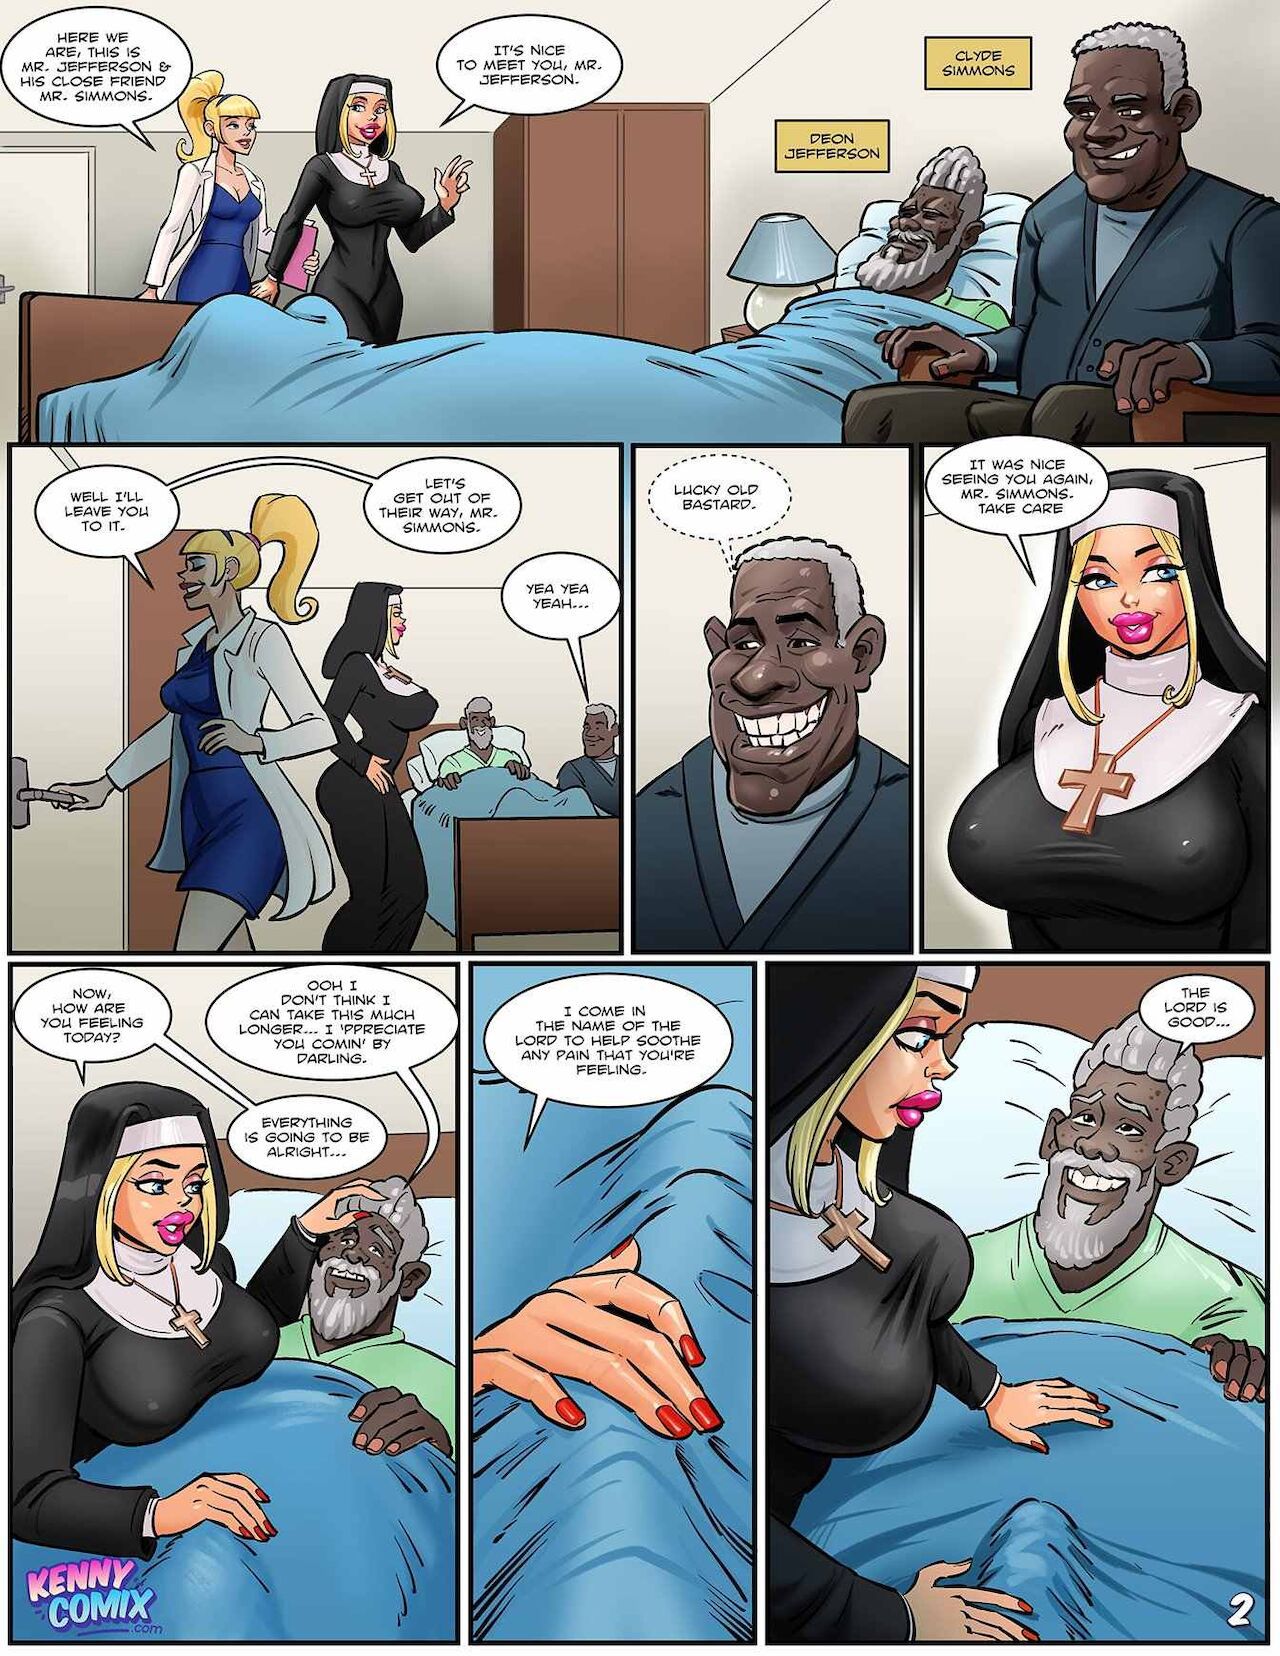 Heavenly Touch – Kenny Comix - english 3